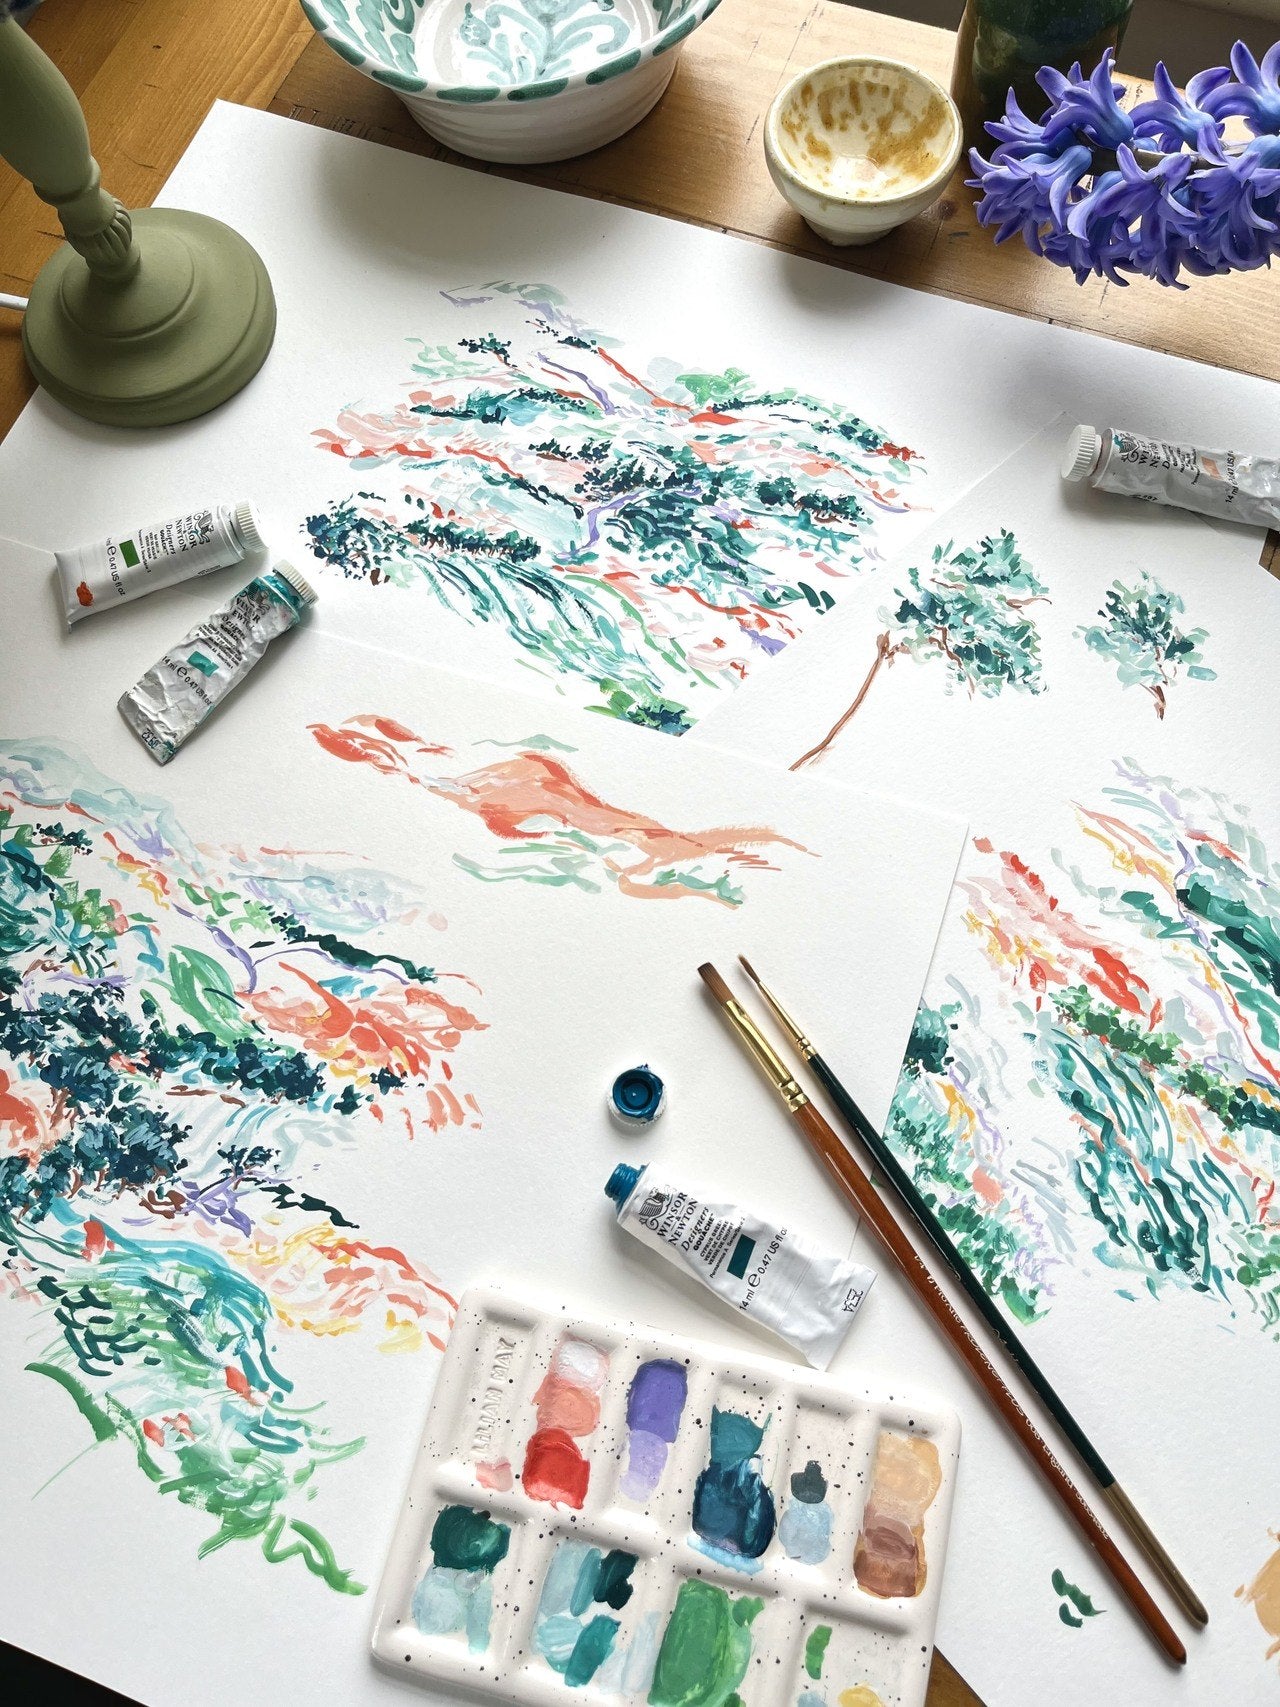 Water color painting to become Plein Air Wallpaper | Rose Jocham x Hygge & West